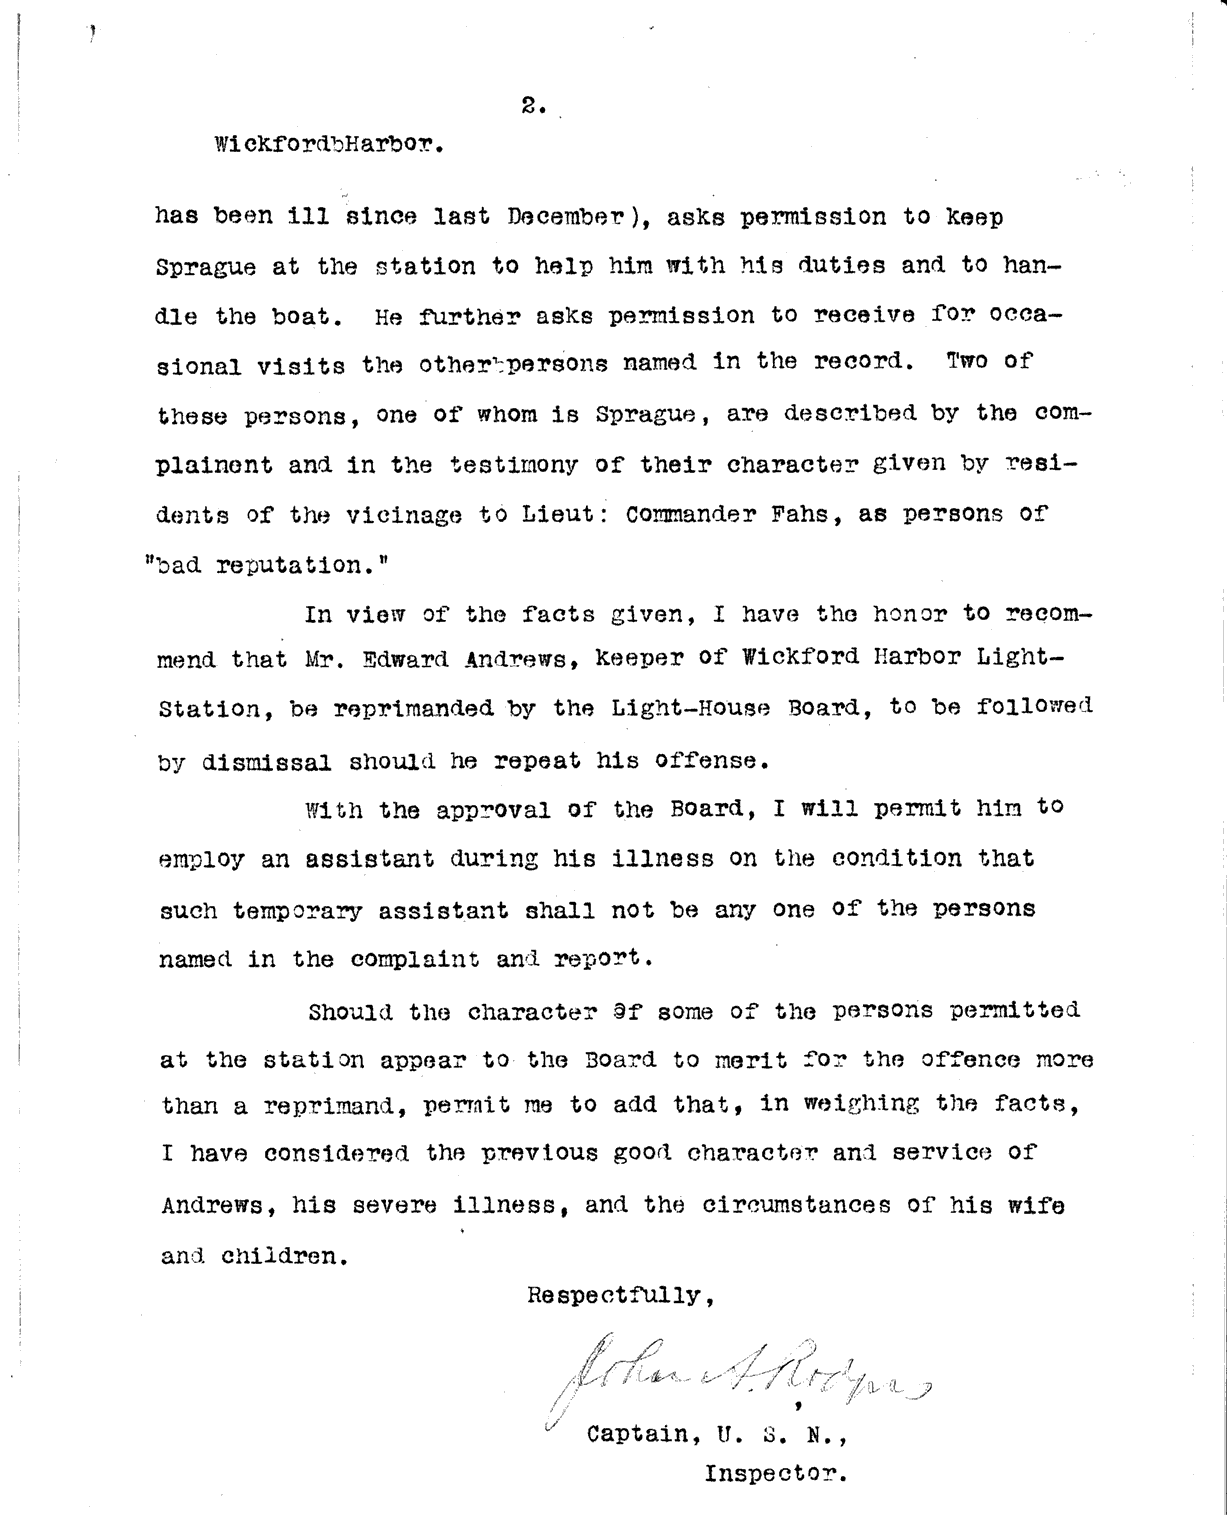 Wickford Harbor Light - Inspector's Letter to Light-house Board - page 2